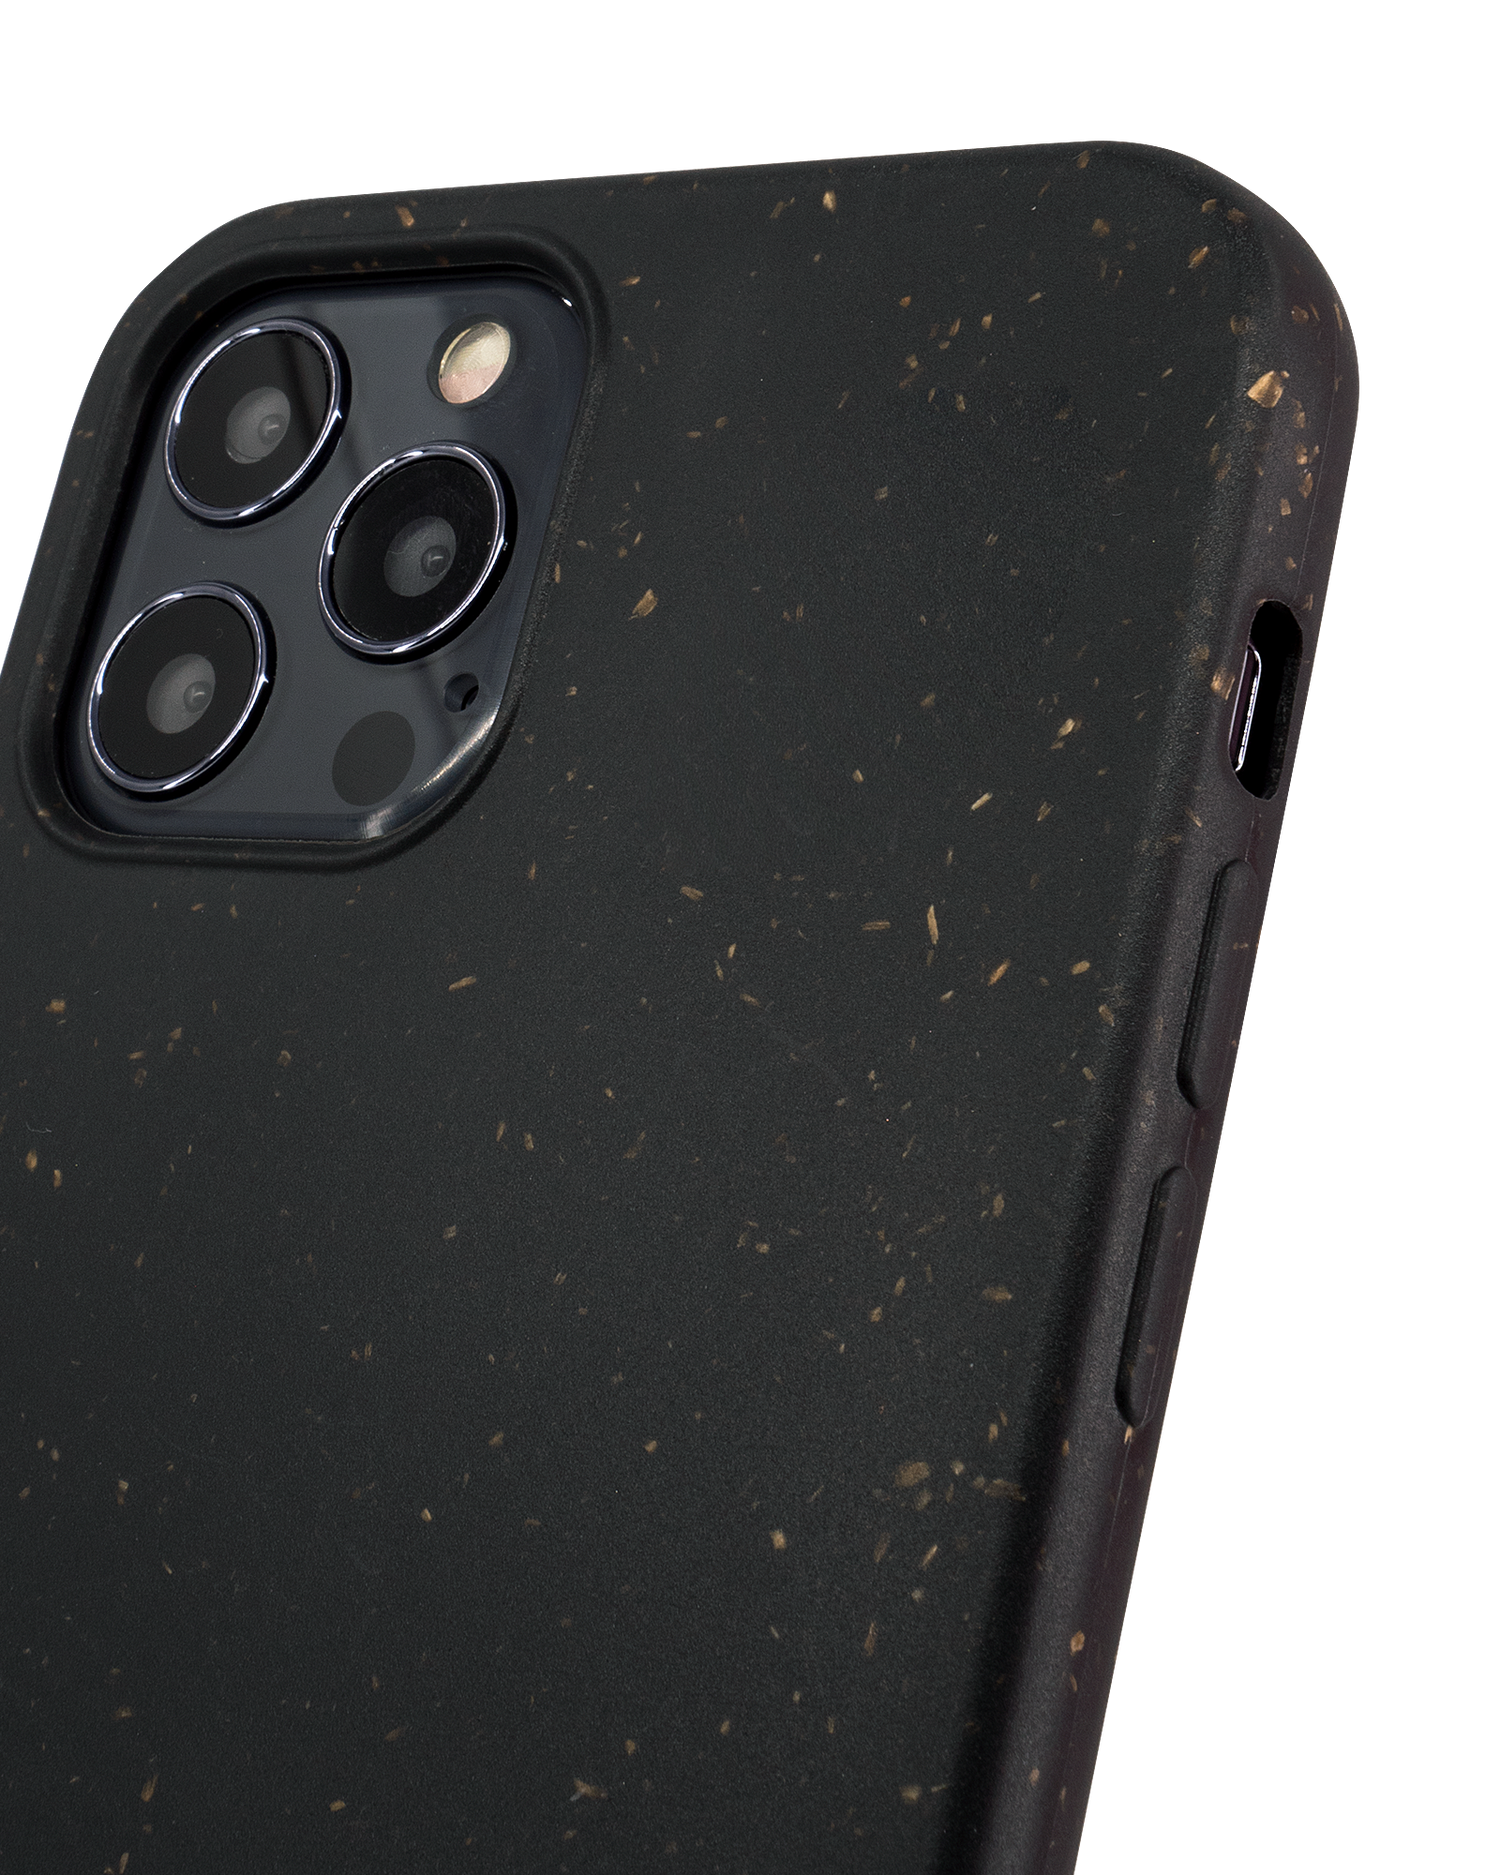 Black Eco-Friendly Phone Case for Apple iPhone 12, Apple iPhone 12 Pro: Details inside